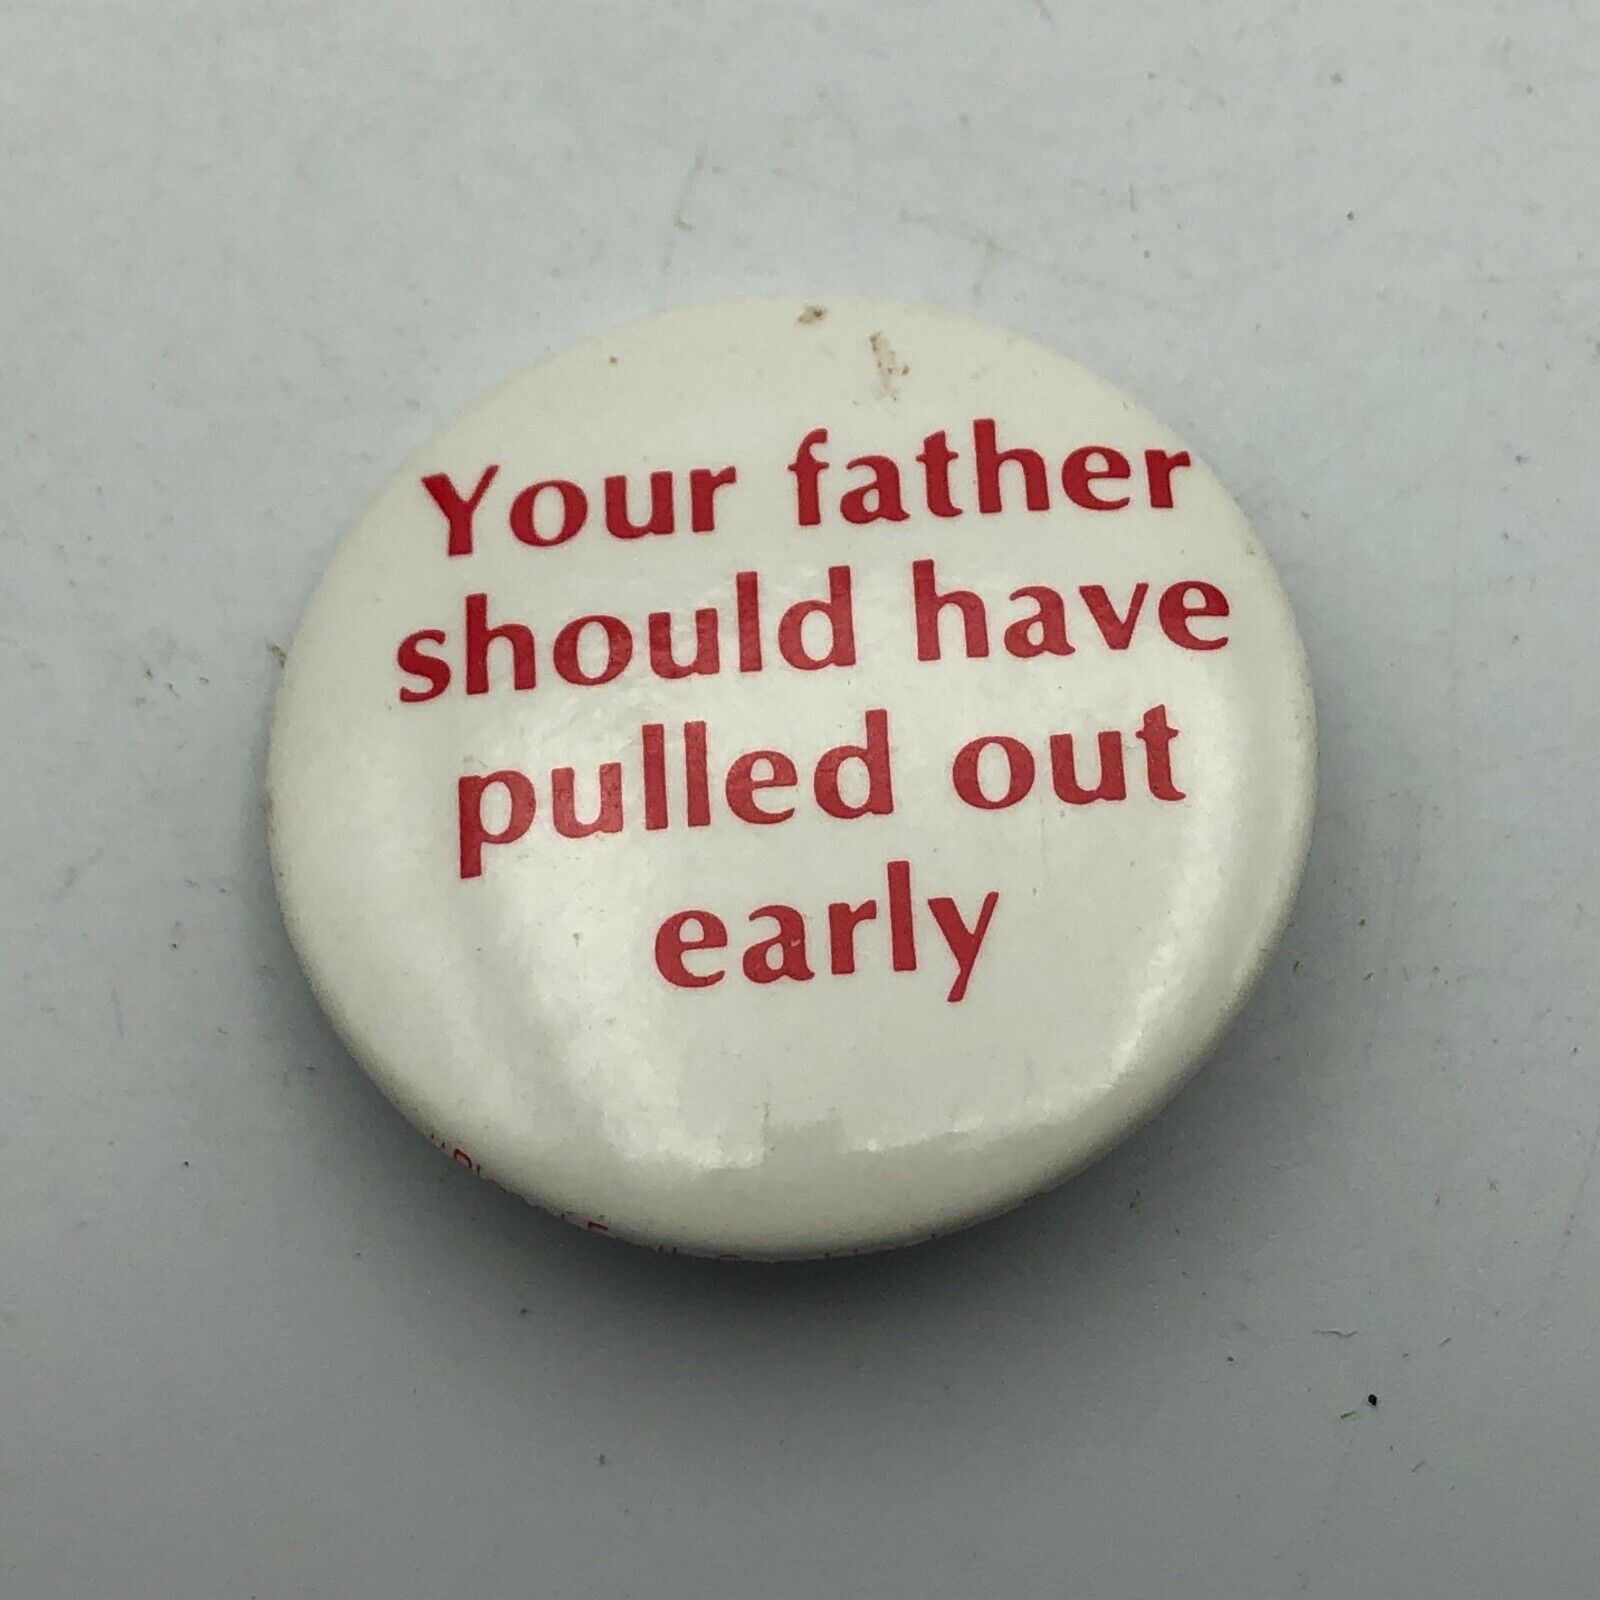 Vtg Your Father Should Have Pulled Out Early Pin Button Funny Humorous D6